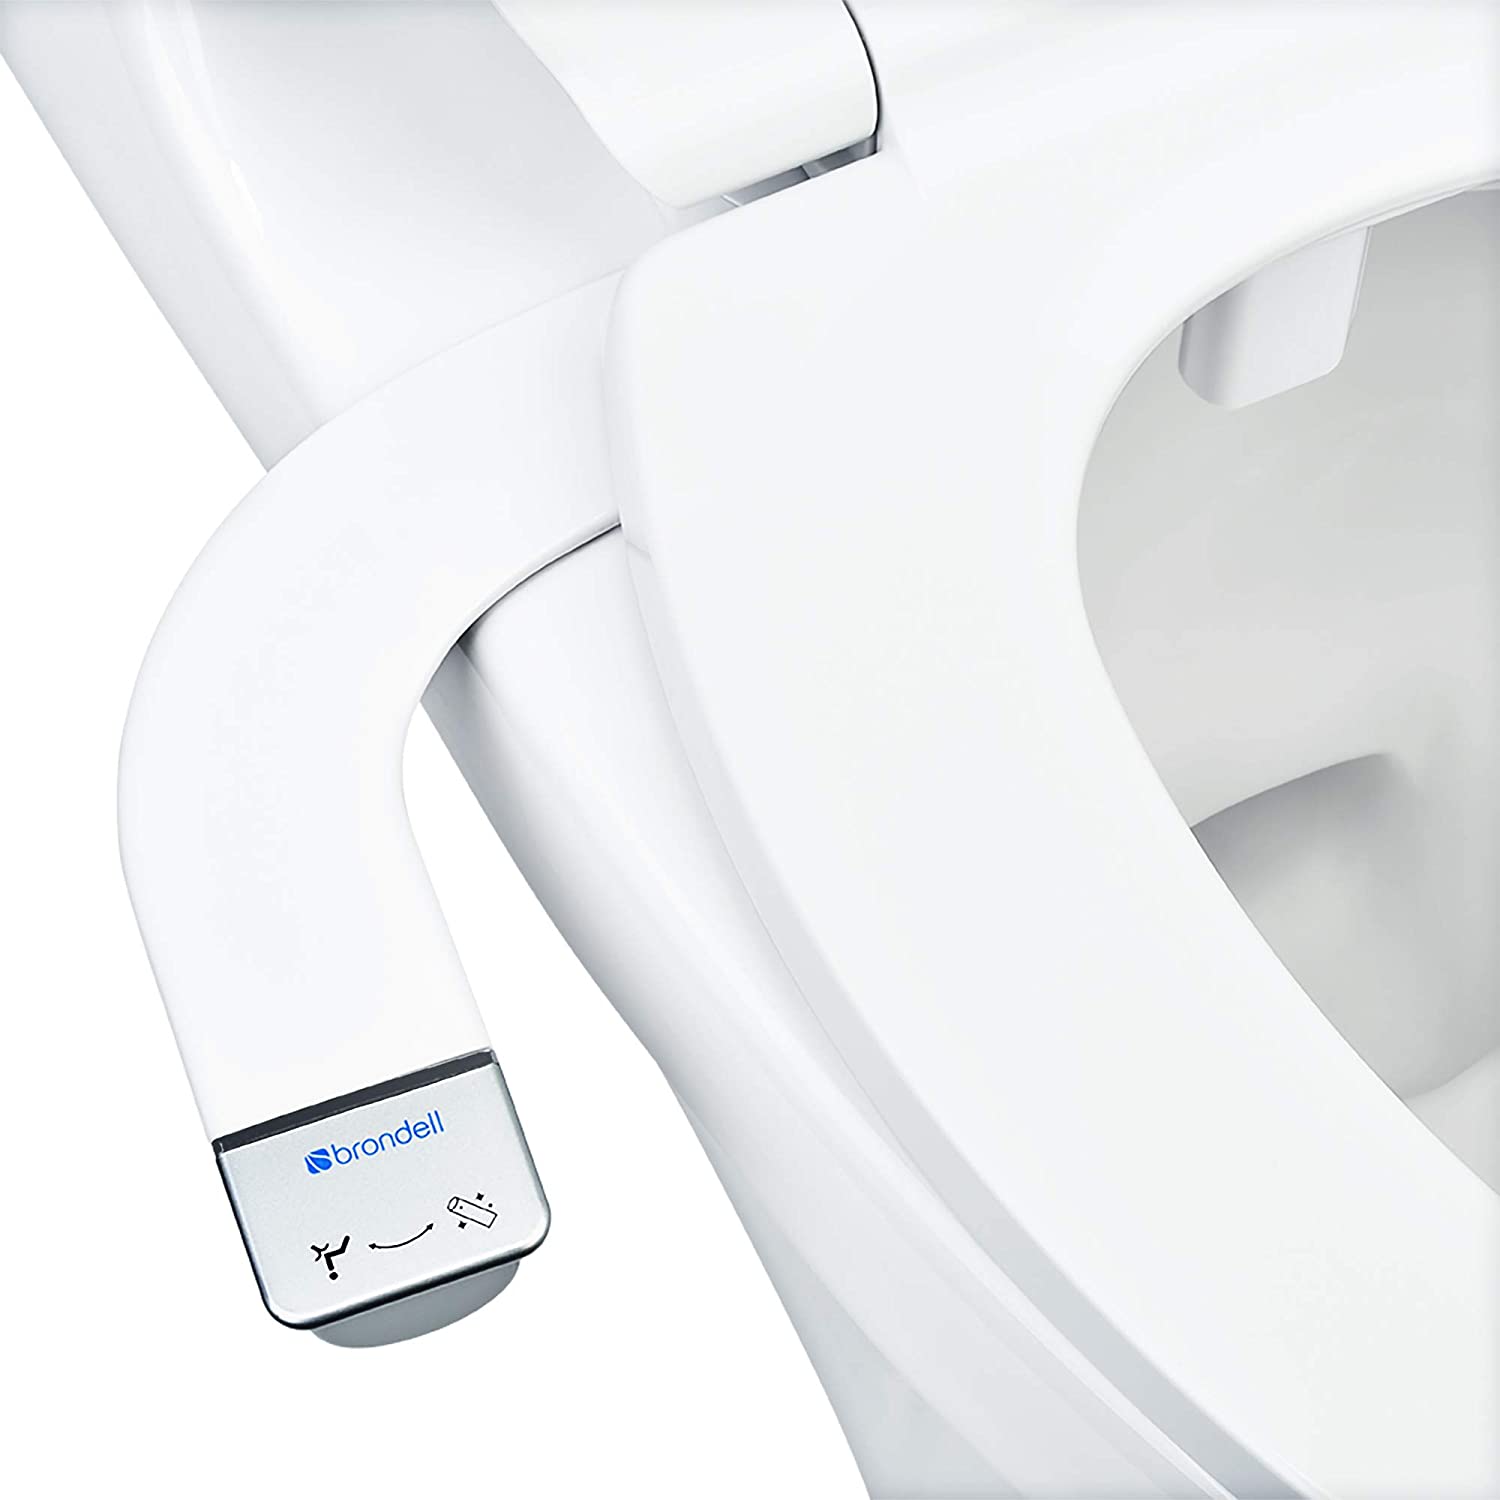 Brondell SS-150 Thinline SimpleSpa Self-Cleaning Bidet Attachment